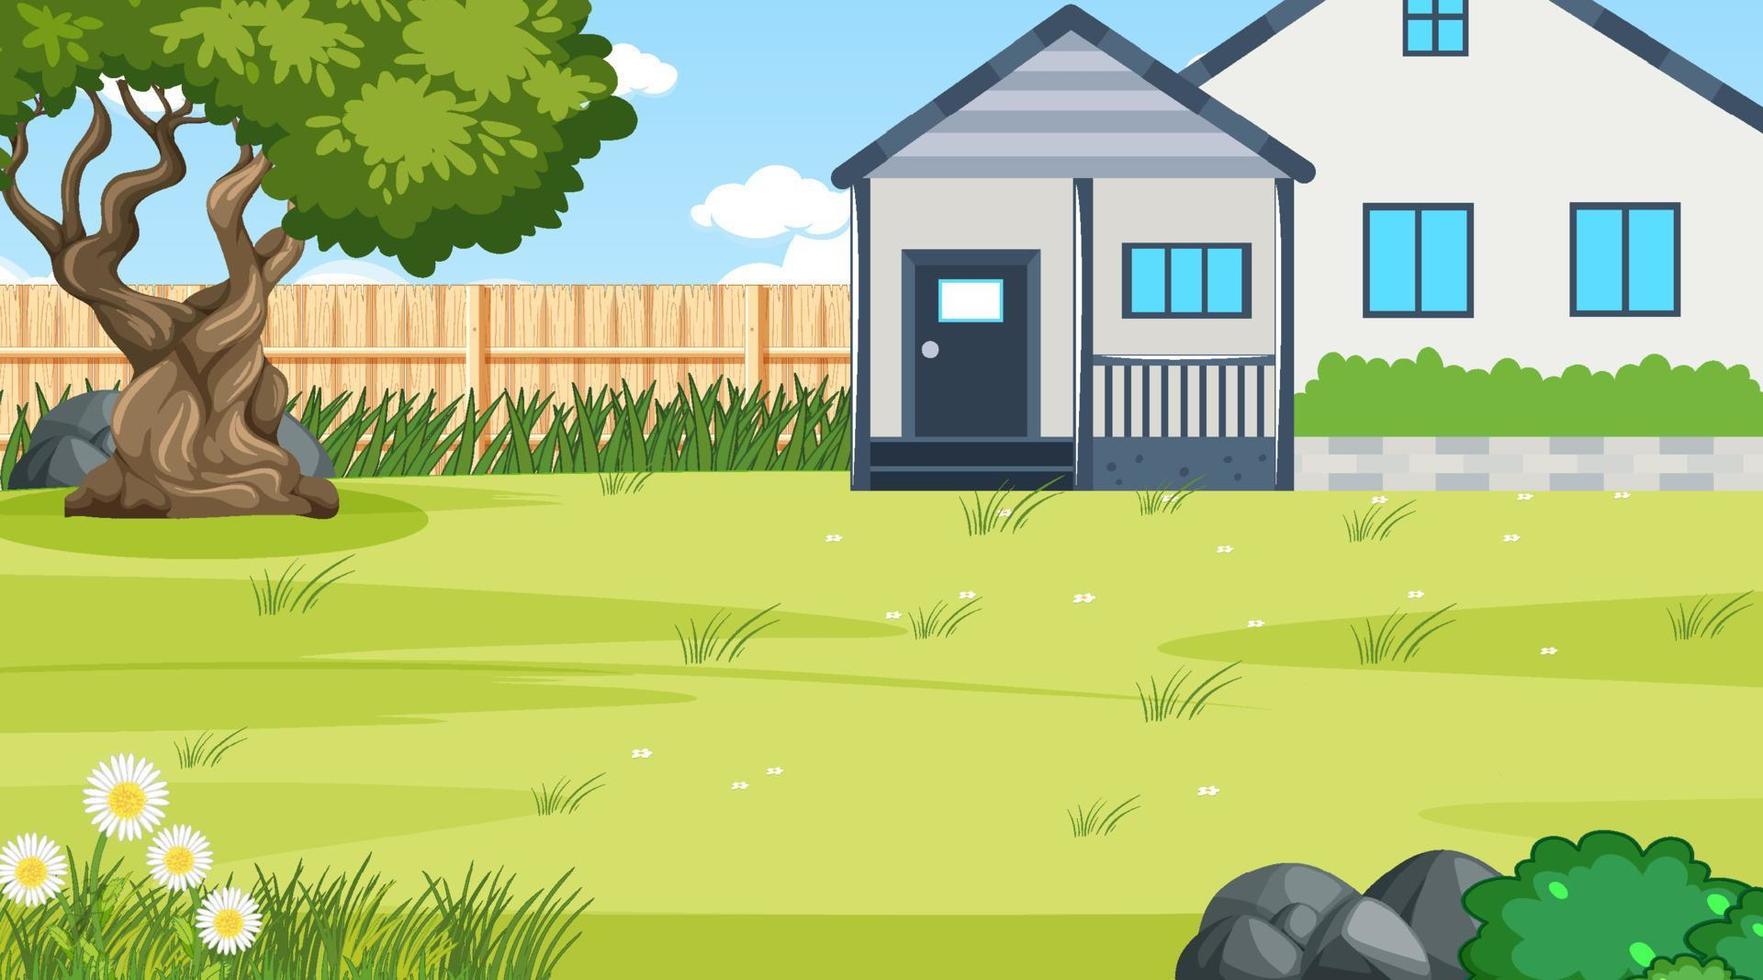 Scene with house and garden vector